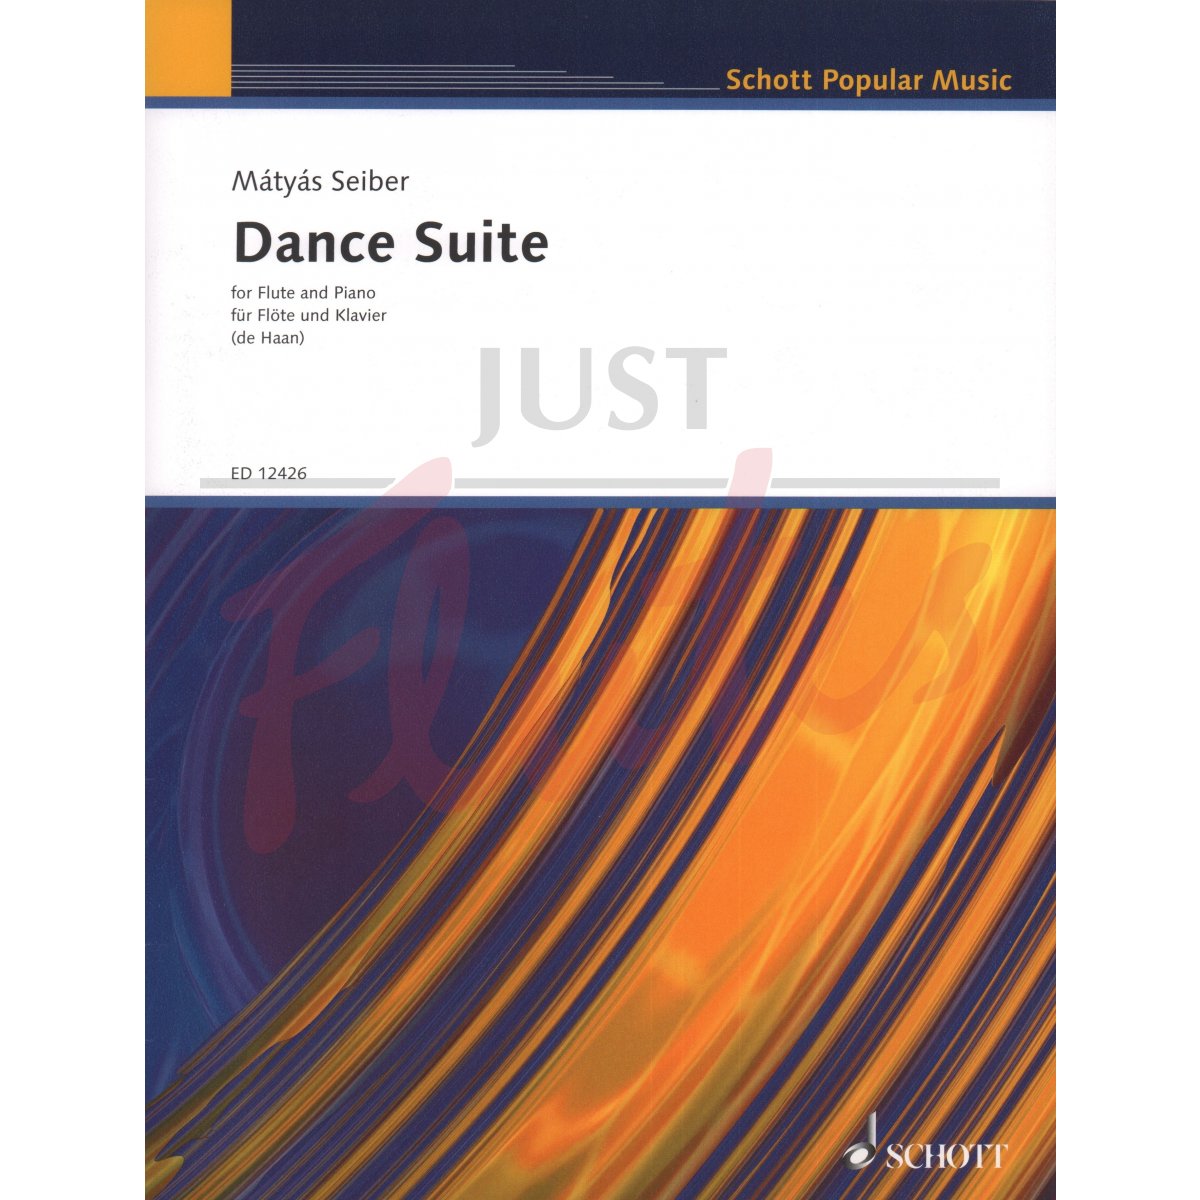 Dance Suite for Flute and Piano